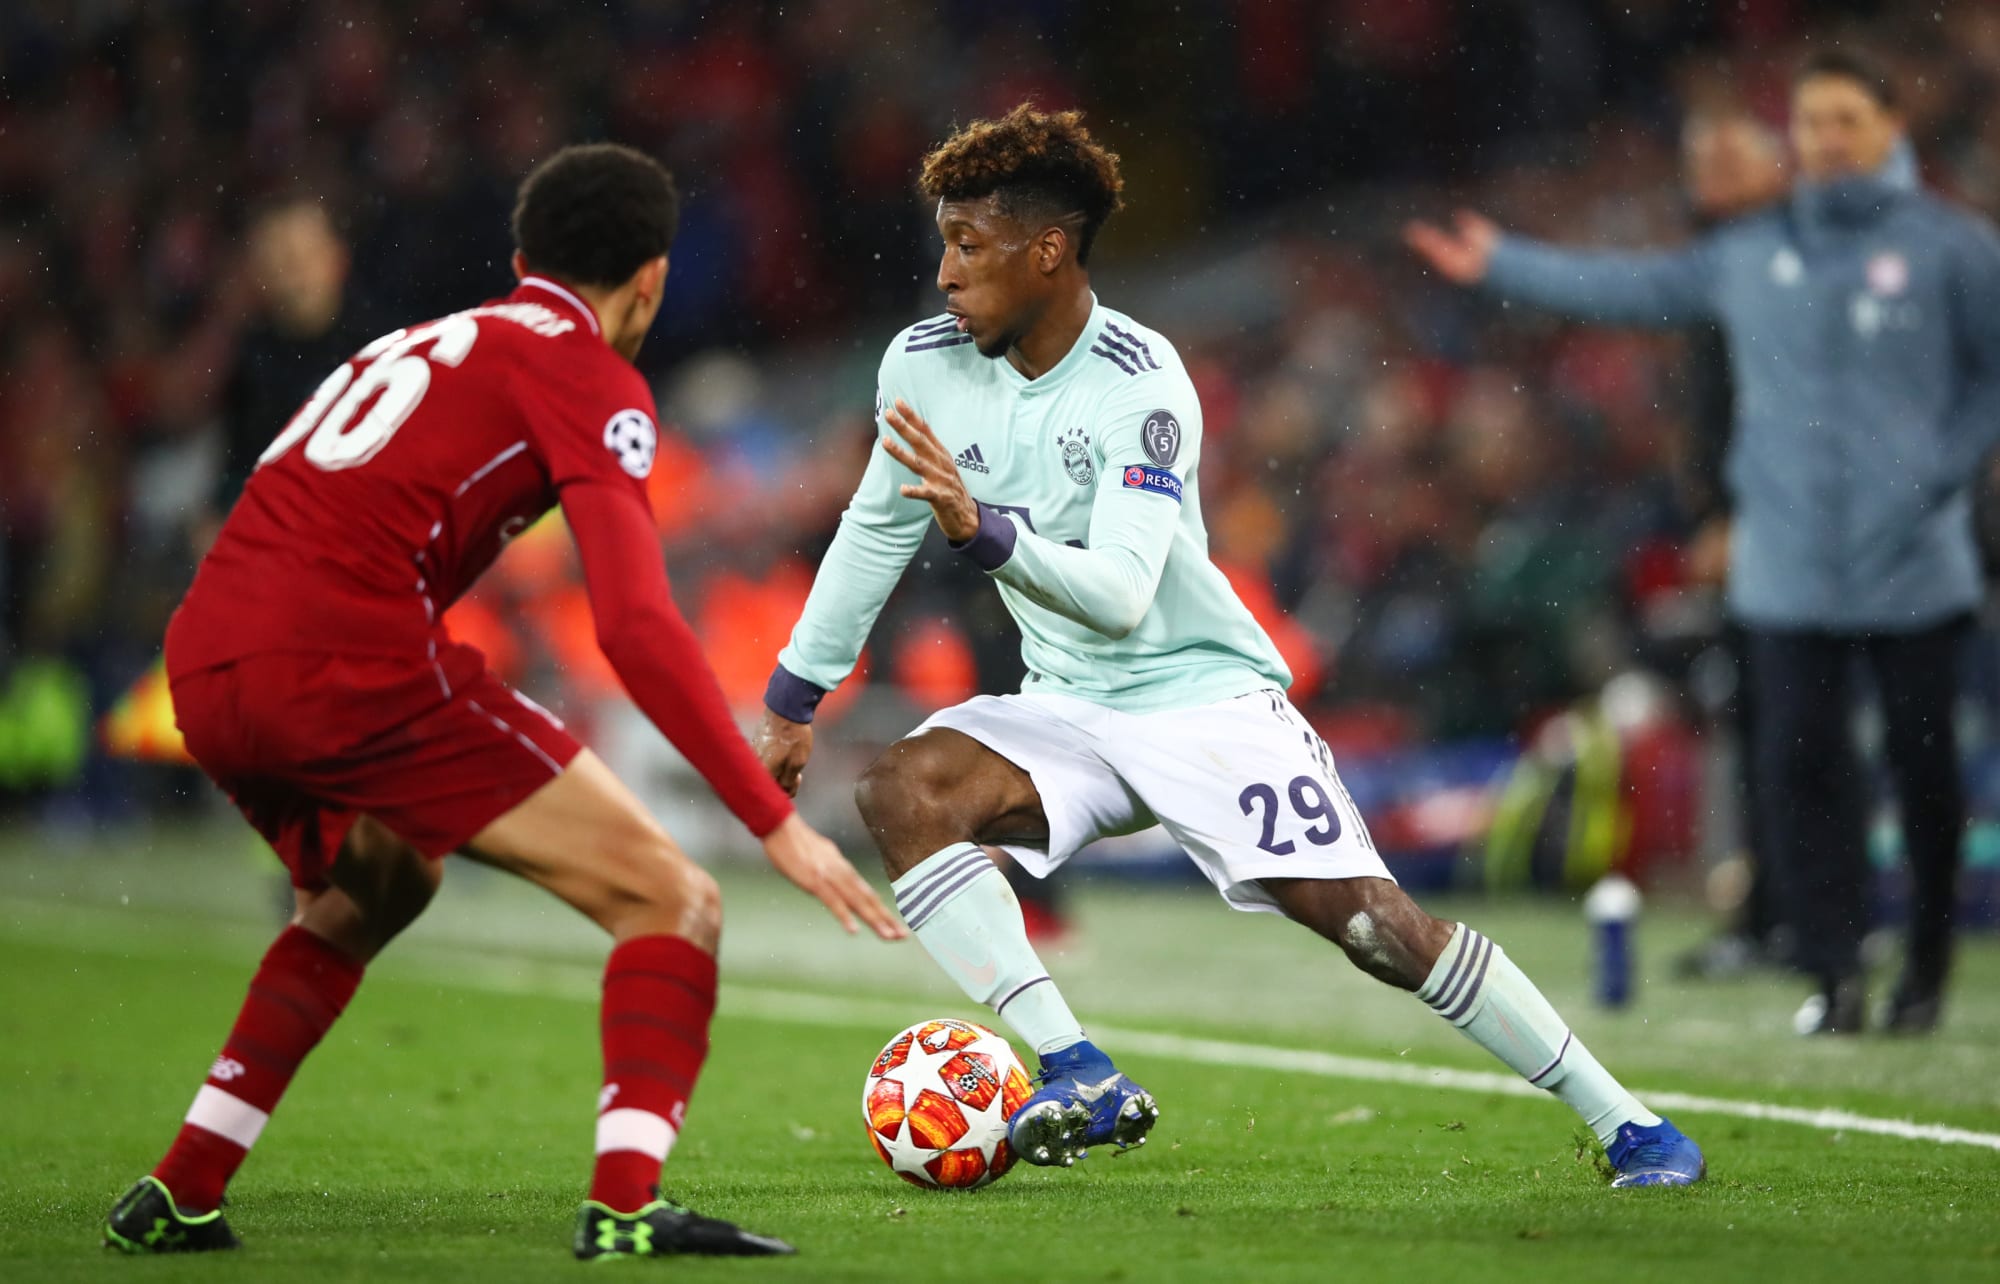 Kinglsey Coman reveals his best position in football and ask to play the No.10 role